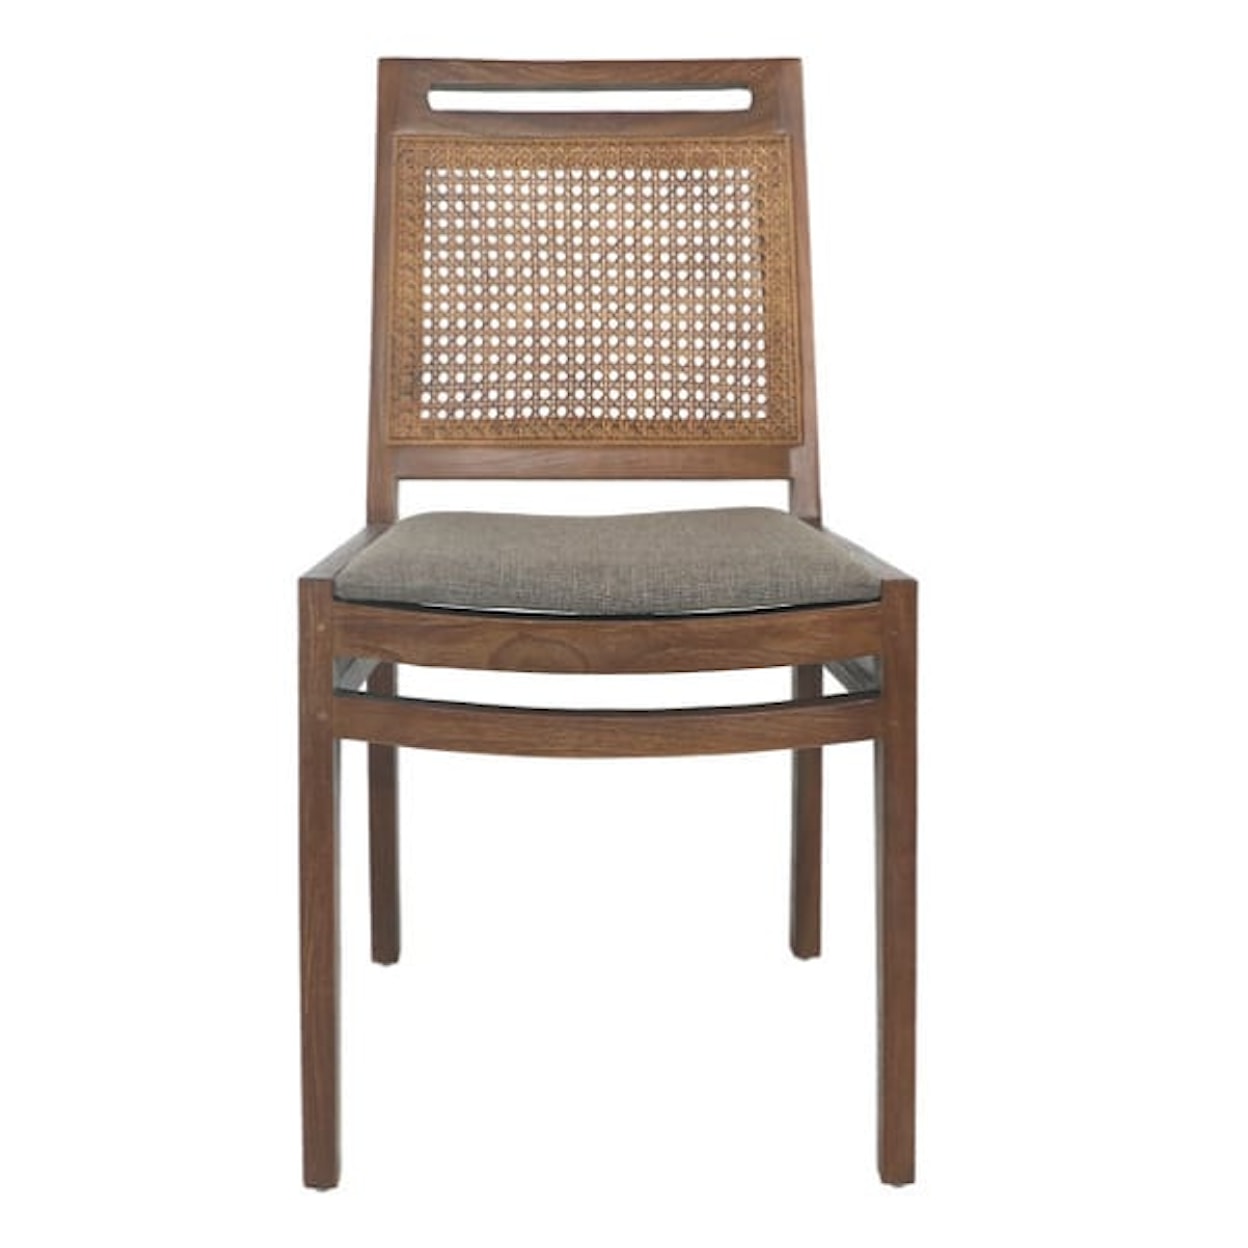 Dovetail Furniture Dovetail Accessories Table and Four Chairs